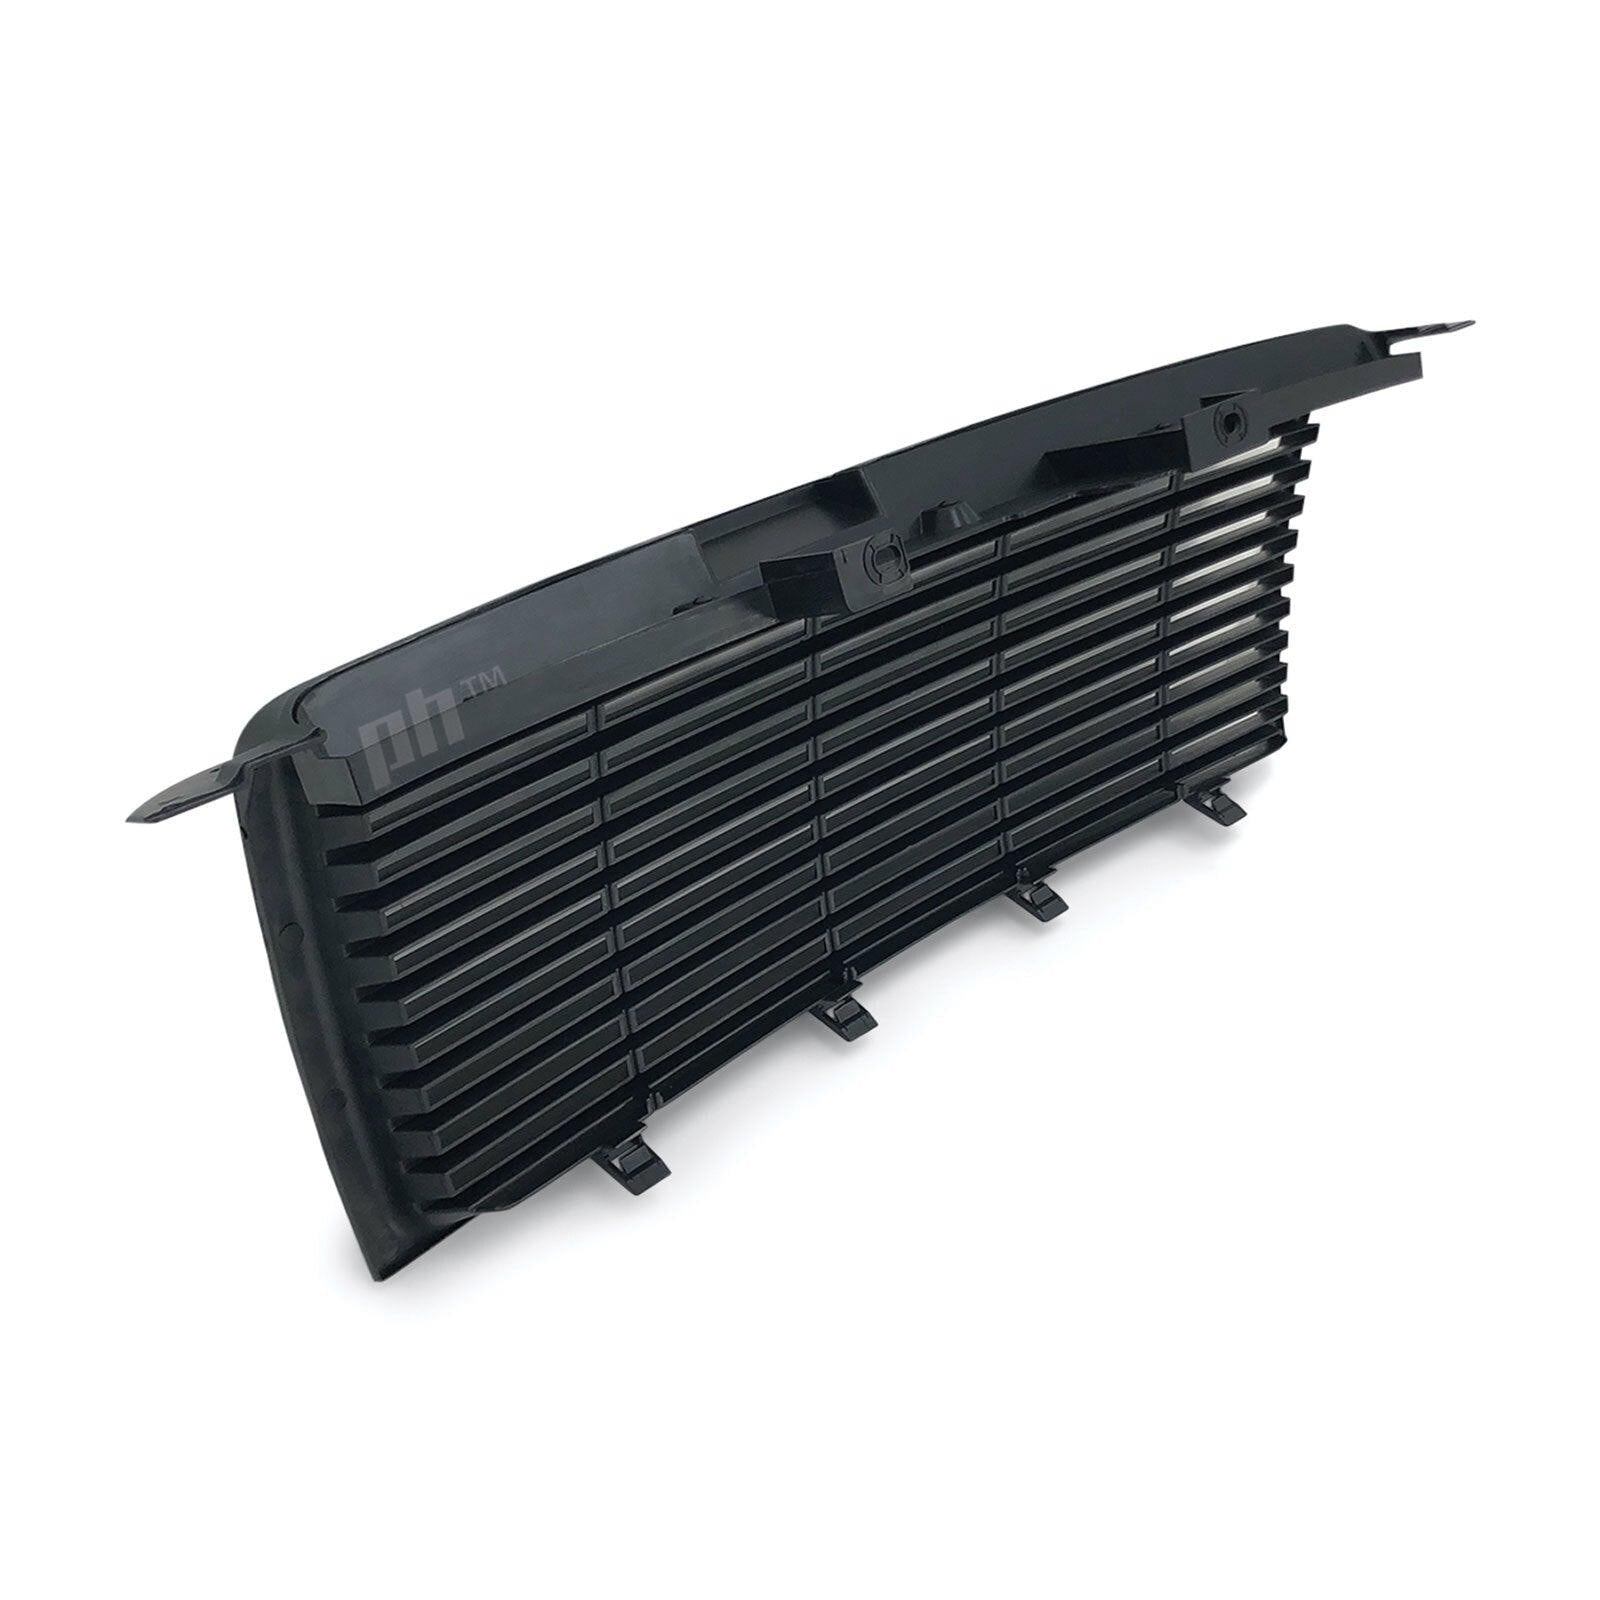 Grill Murdered OUT Billet BLACK EDITION fits Ford Ranger PJ Ute 06-09 - 4X4OC™